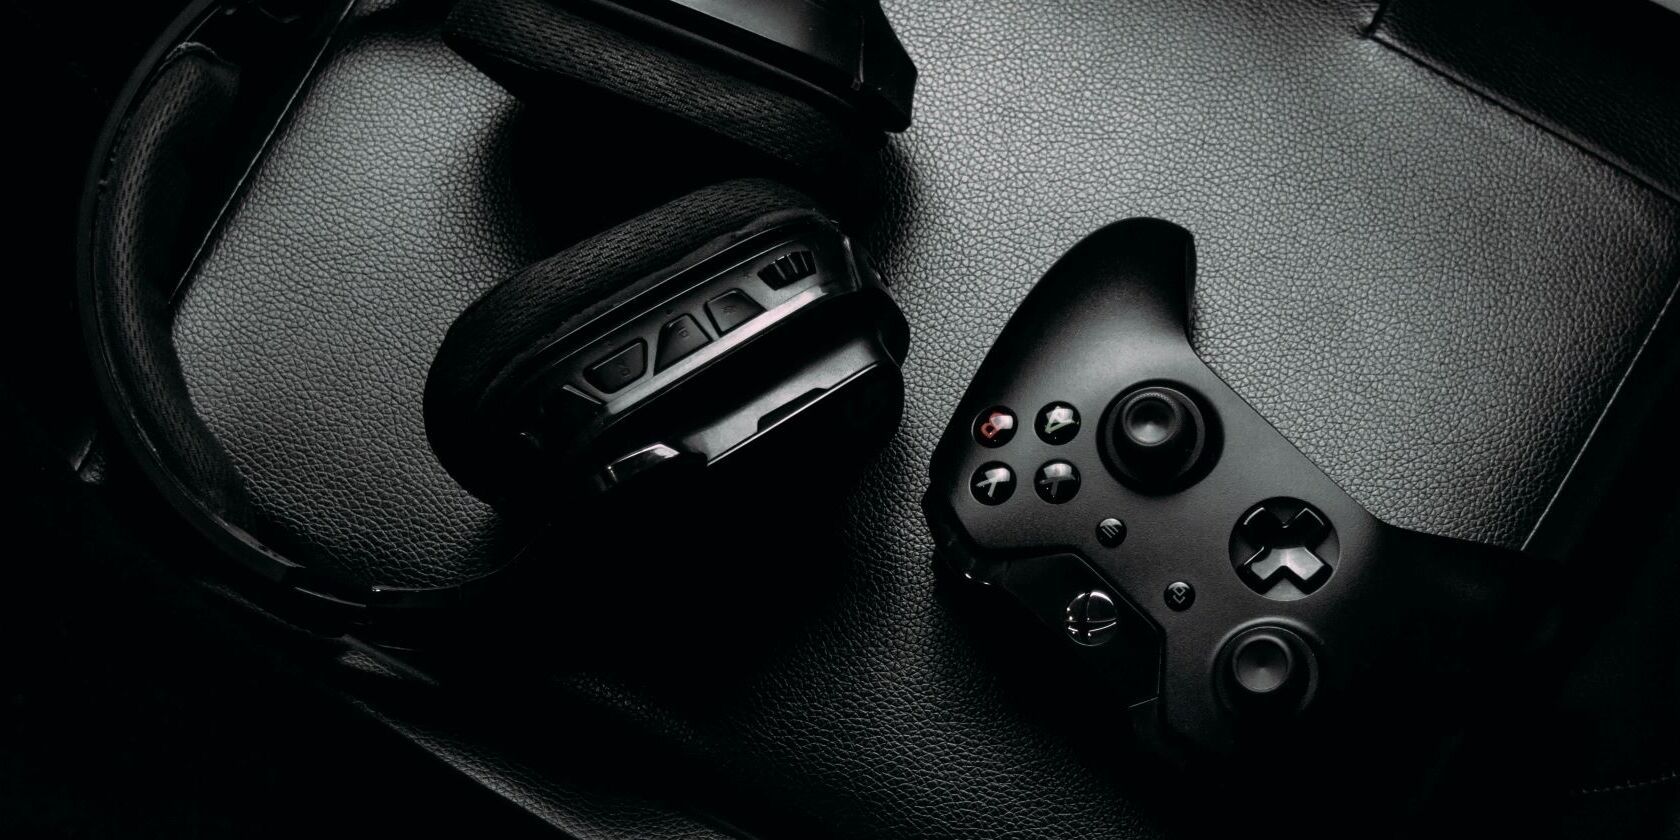 A photograph of an Xbox Wireless Controller next to a headset